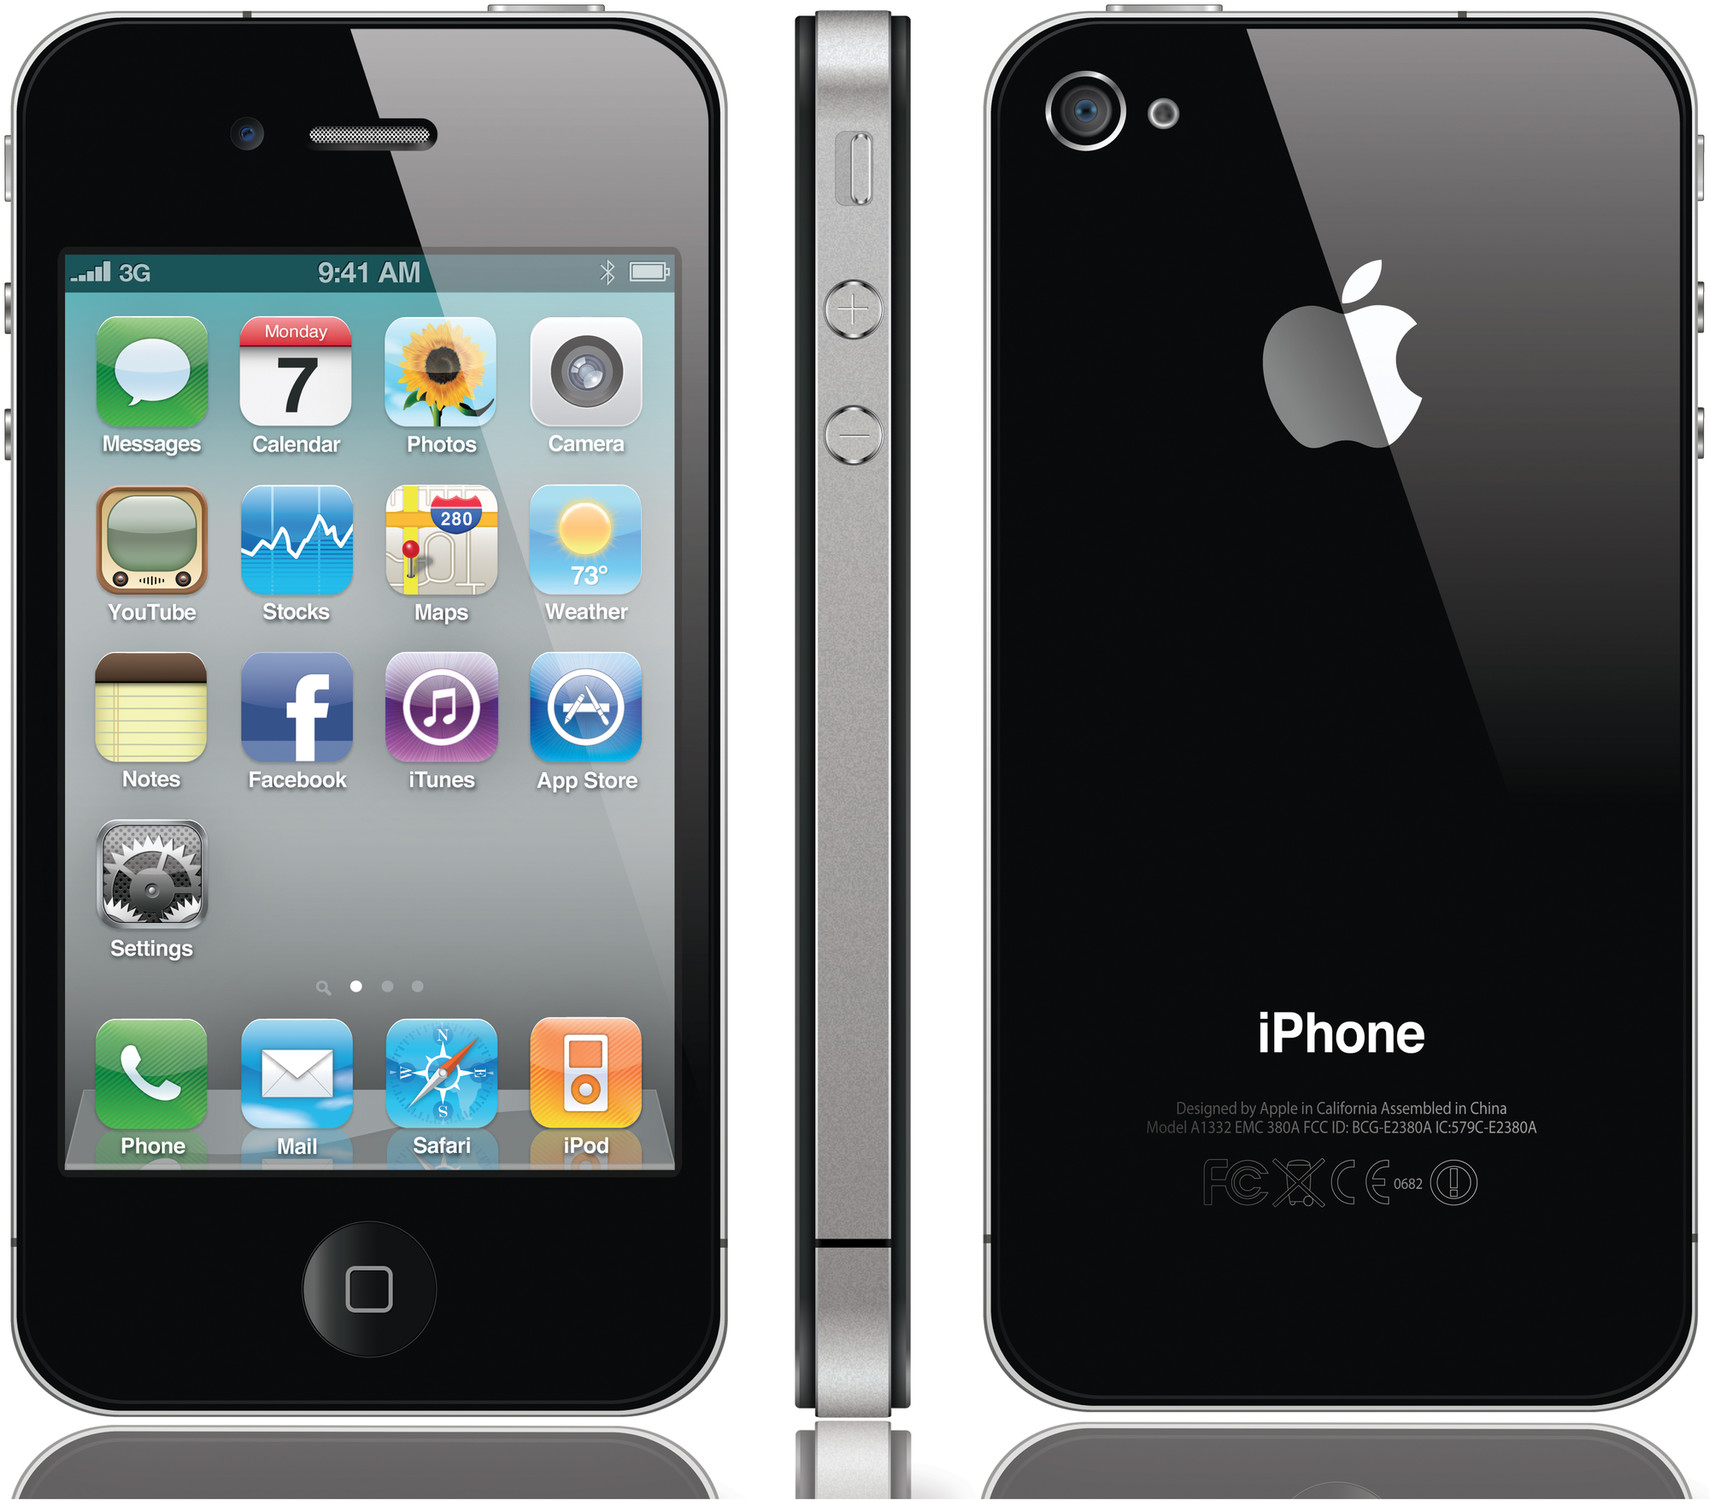 All 96+ Images pictures of the iphone 4 Full HD, 2k, 4k